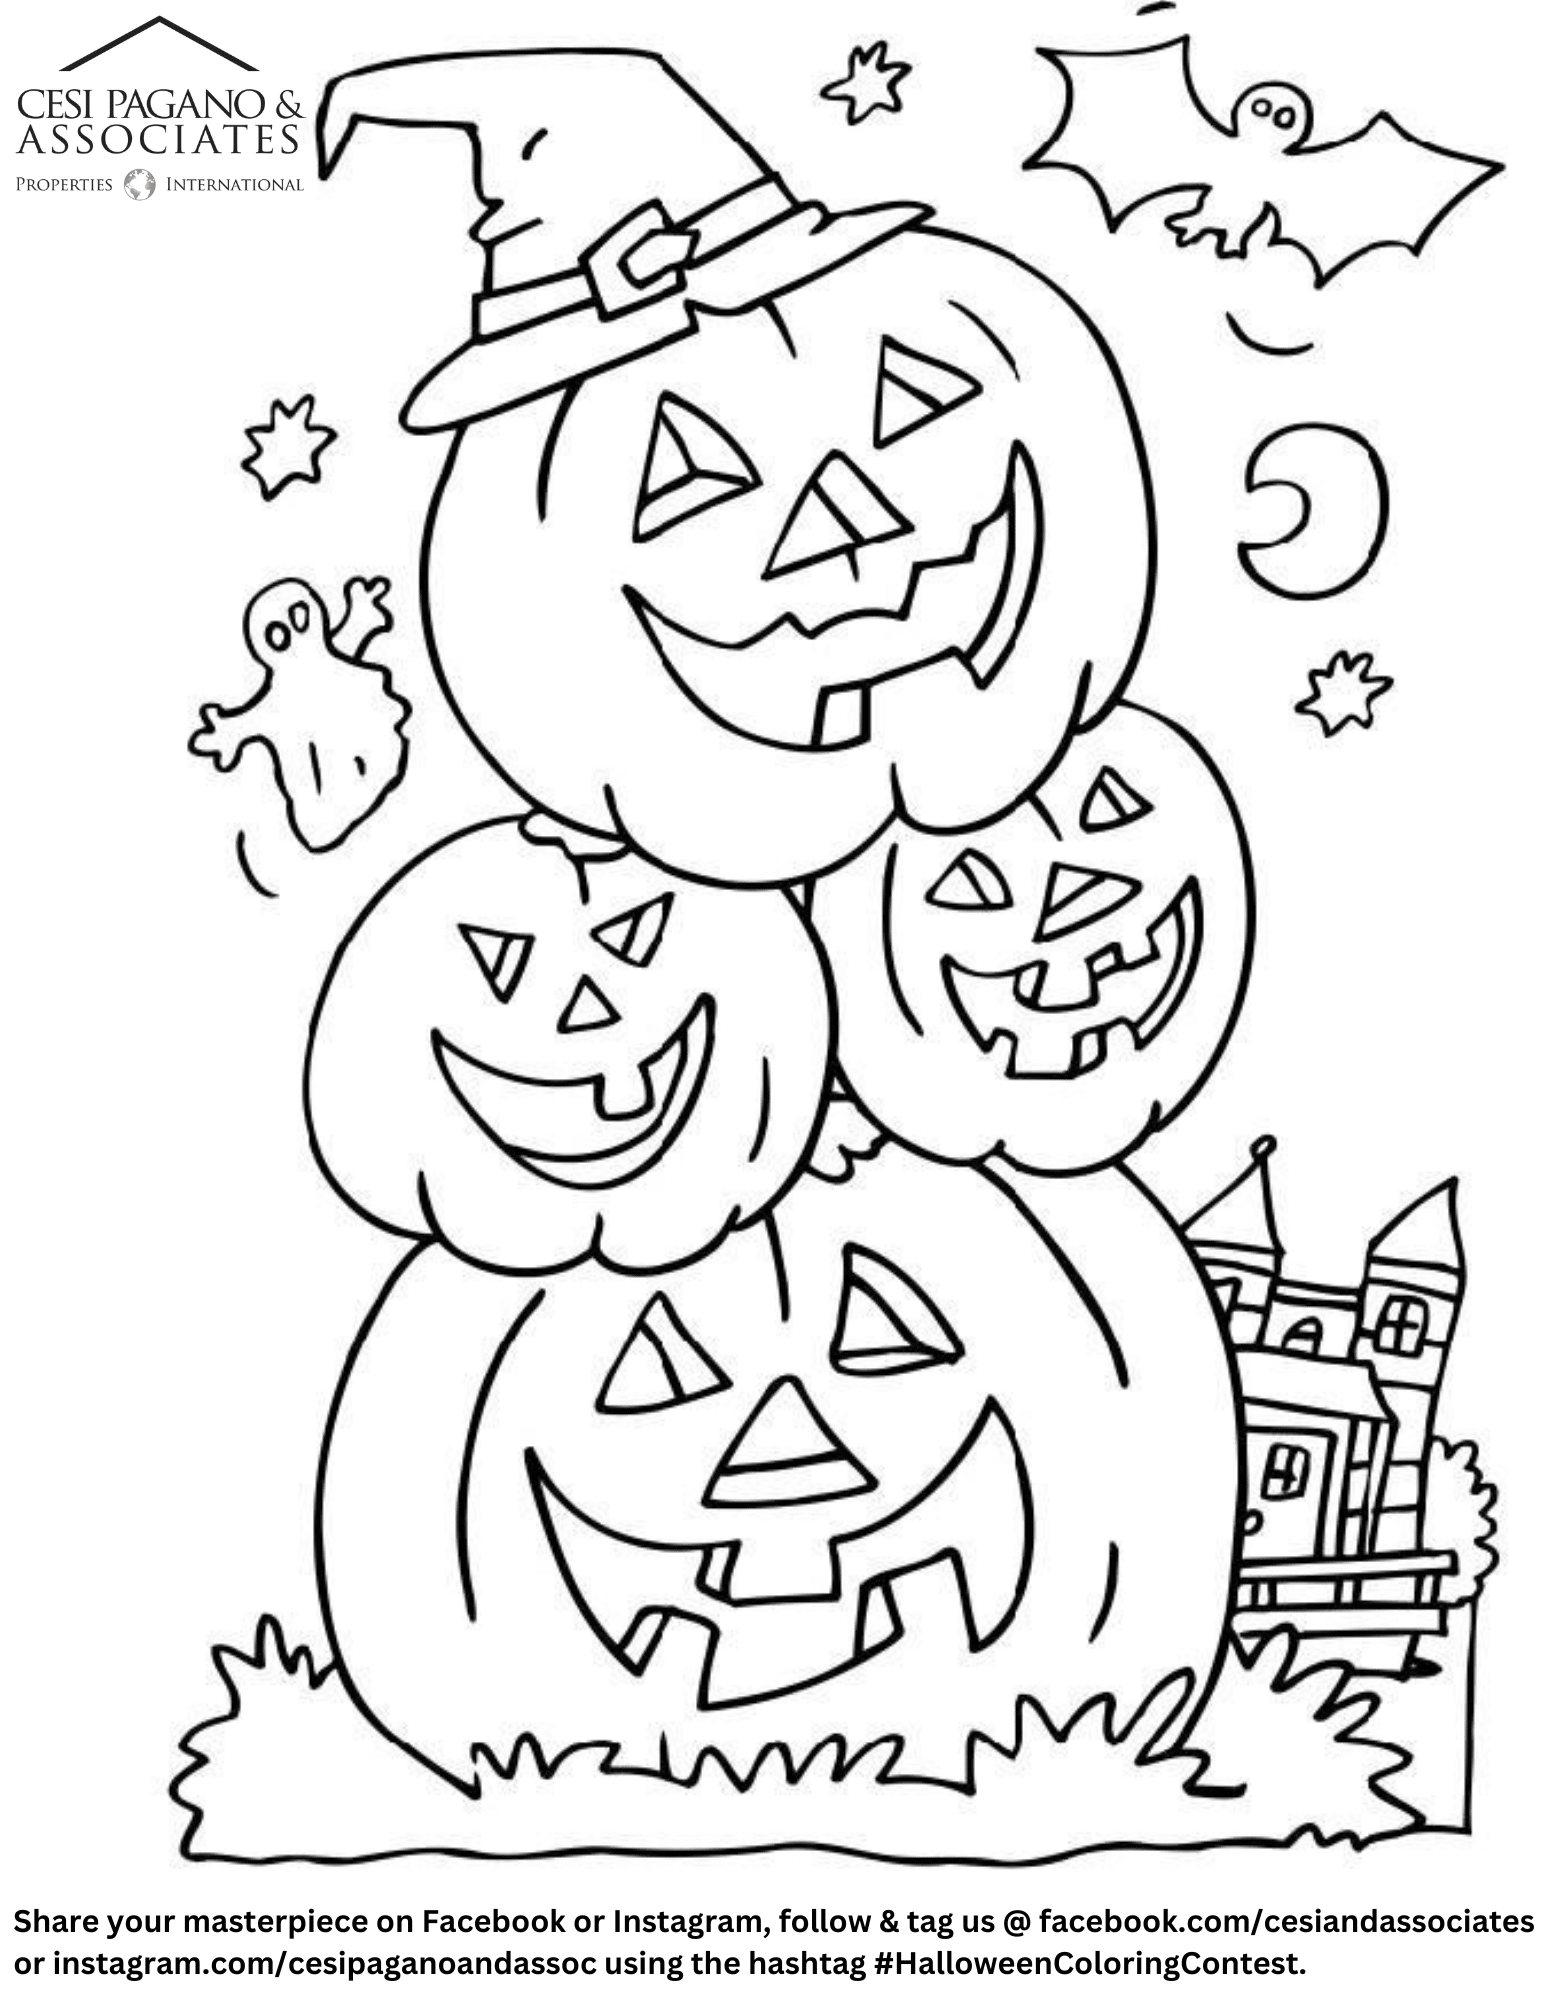 🎃🖍️ Join our Spooktacular Halloween Coloring Contest! 🖍️🎃